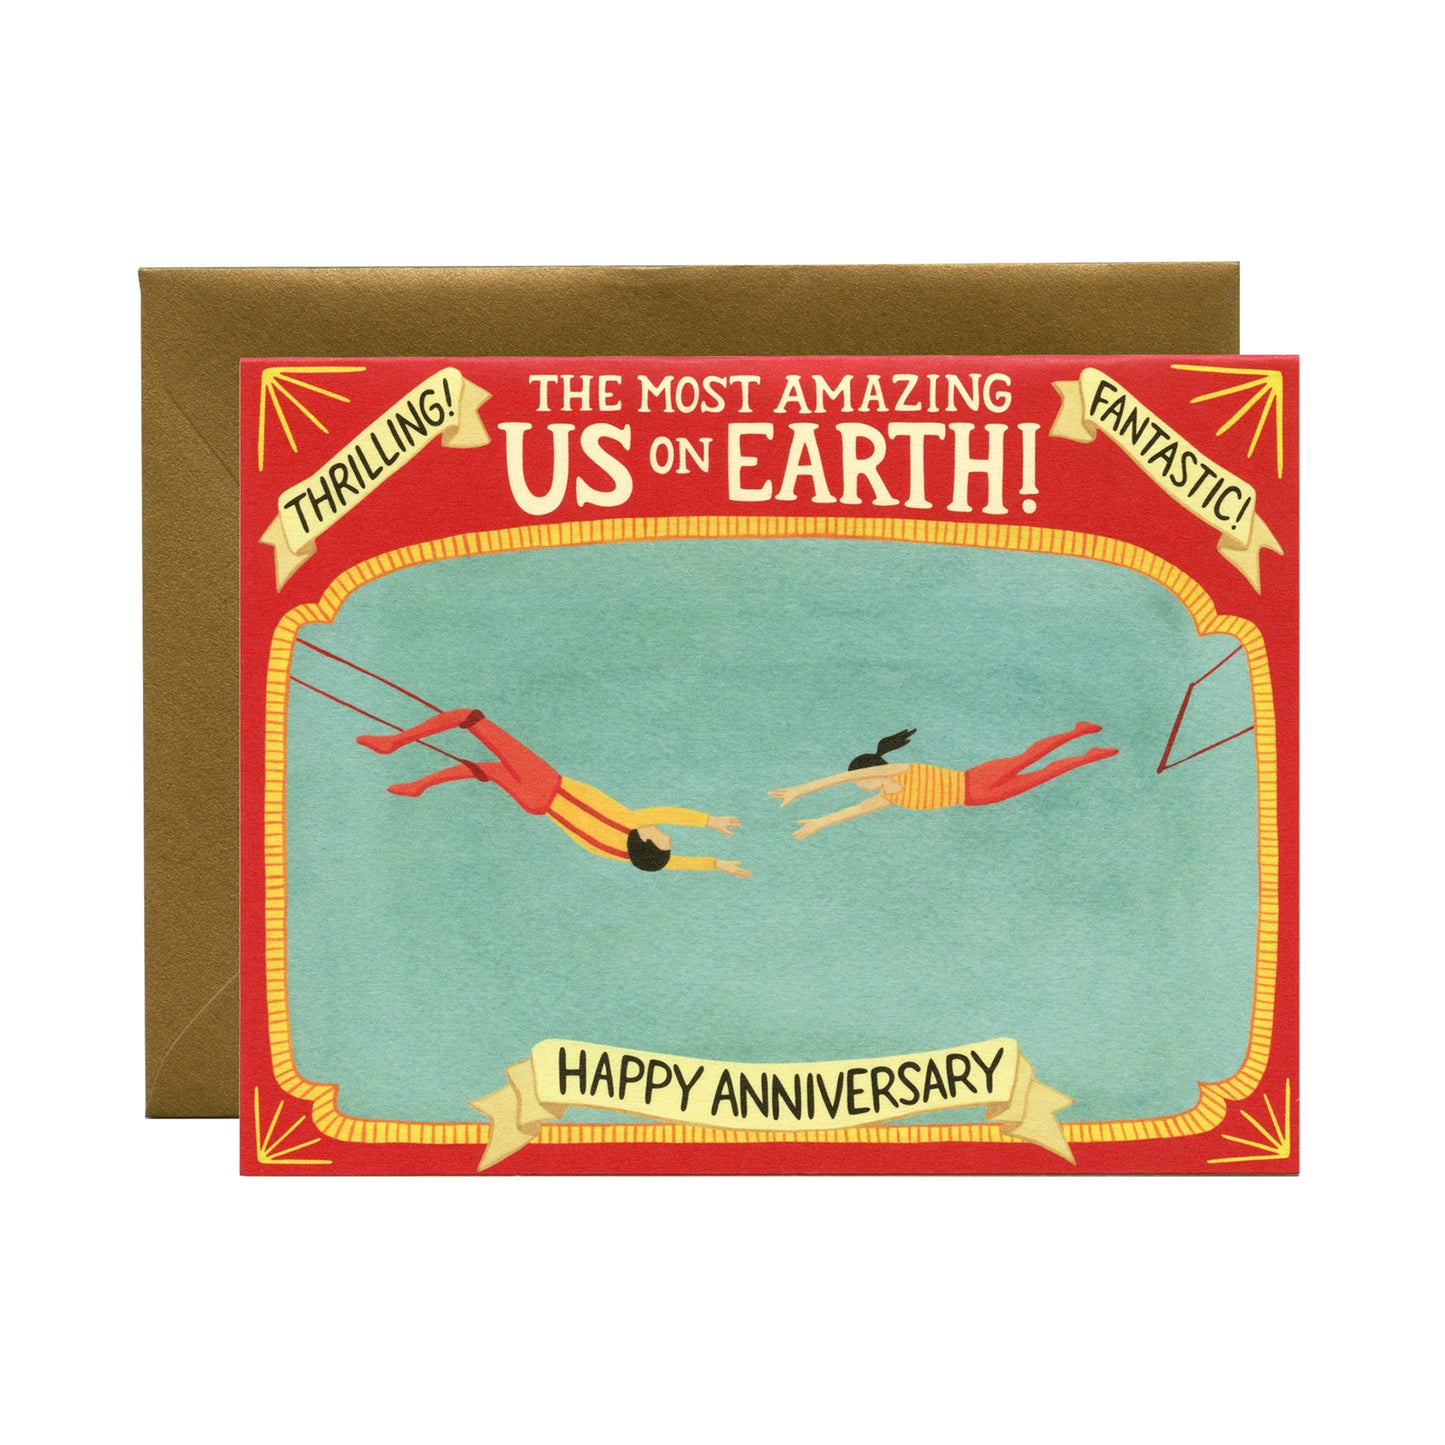 TRAPEZE ARTISTS - ANNIVERSARY GREETING CARD